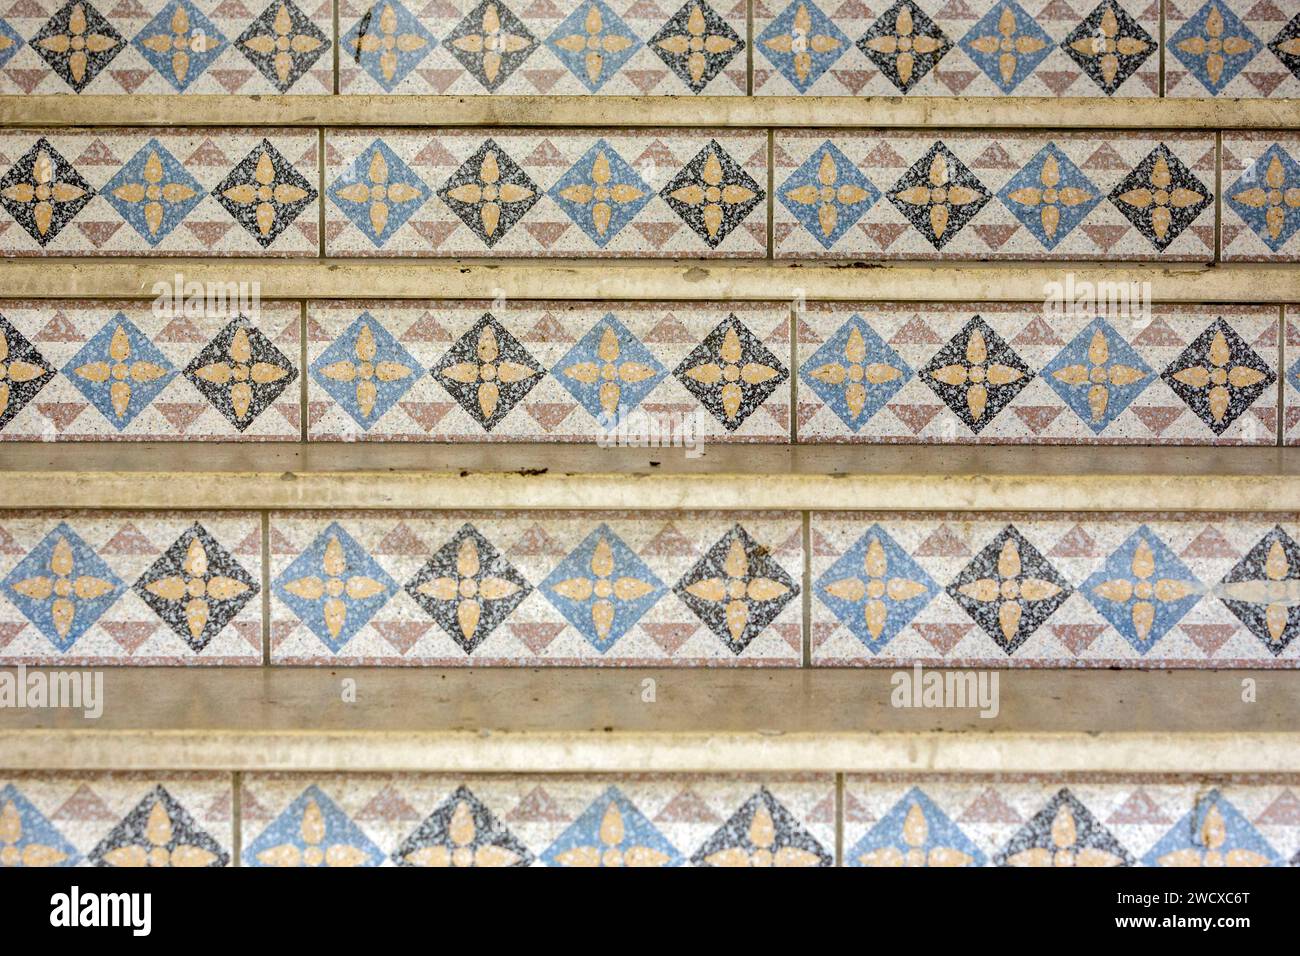 France, Meurthe et Moselle, Nancy, detail of the mosaic of the steps of a stairway in an apartment building located Rue Victor Lemoine Stock Photo